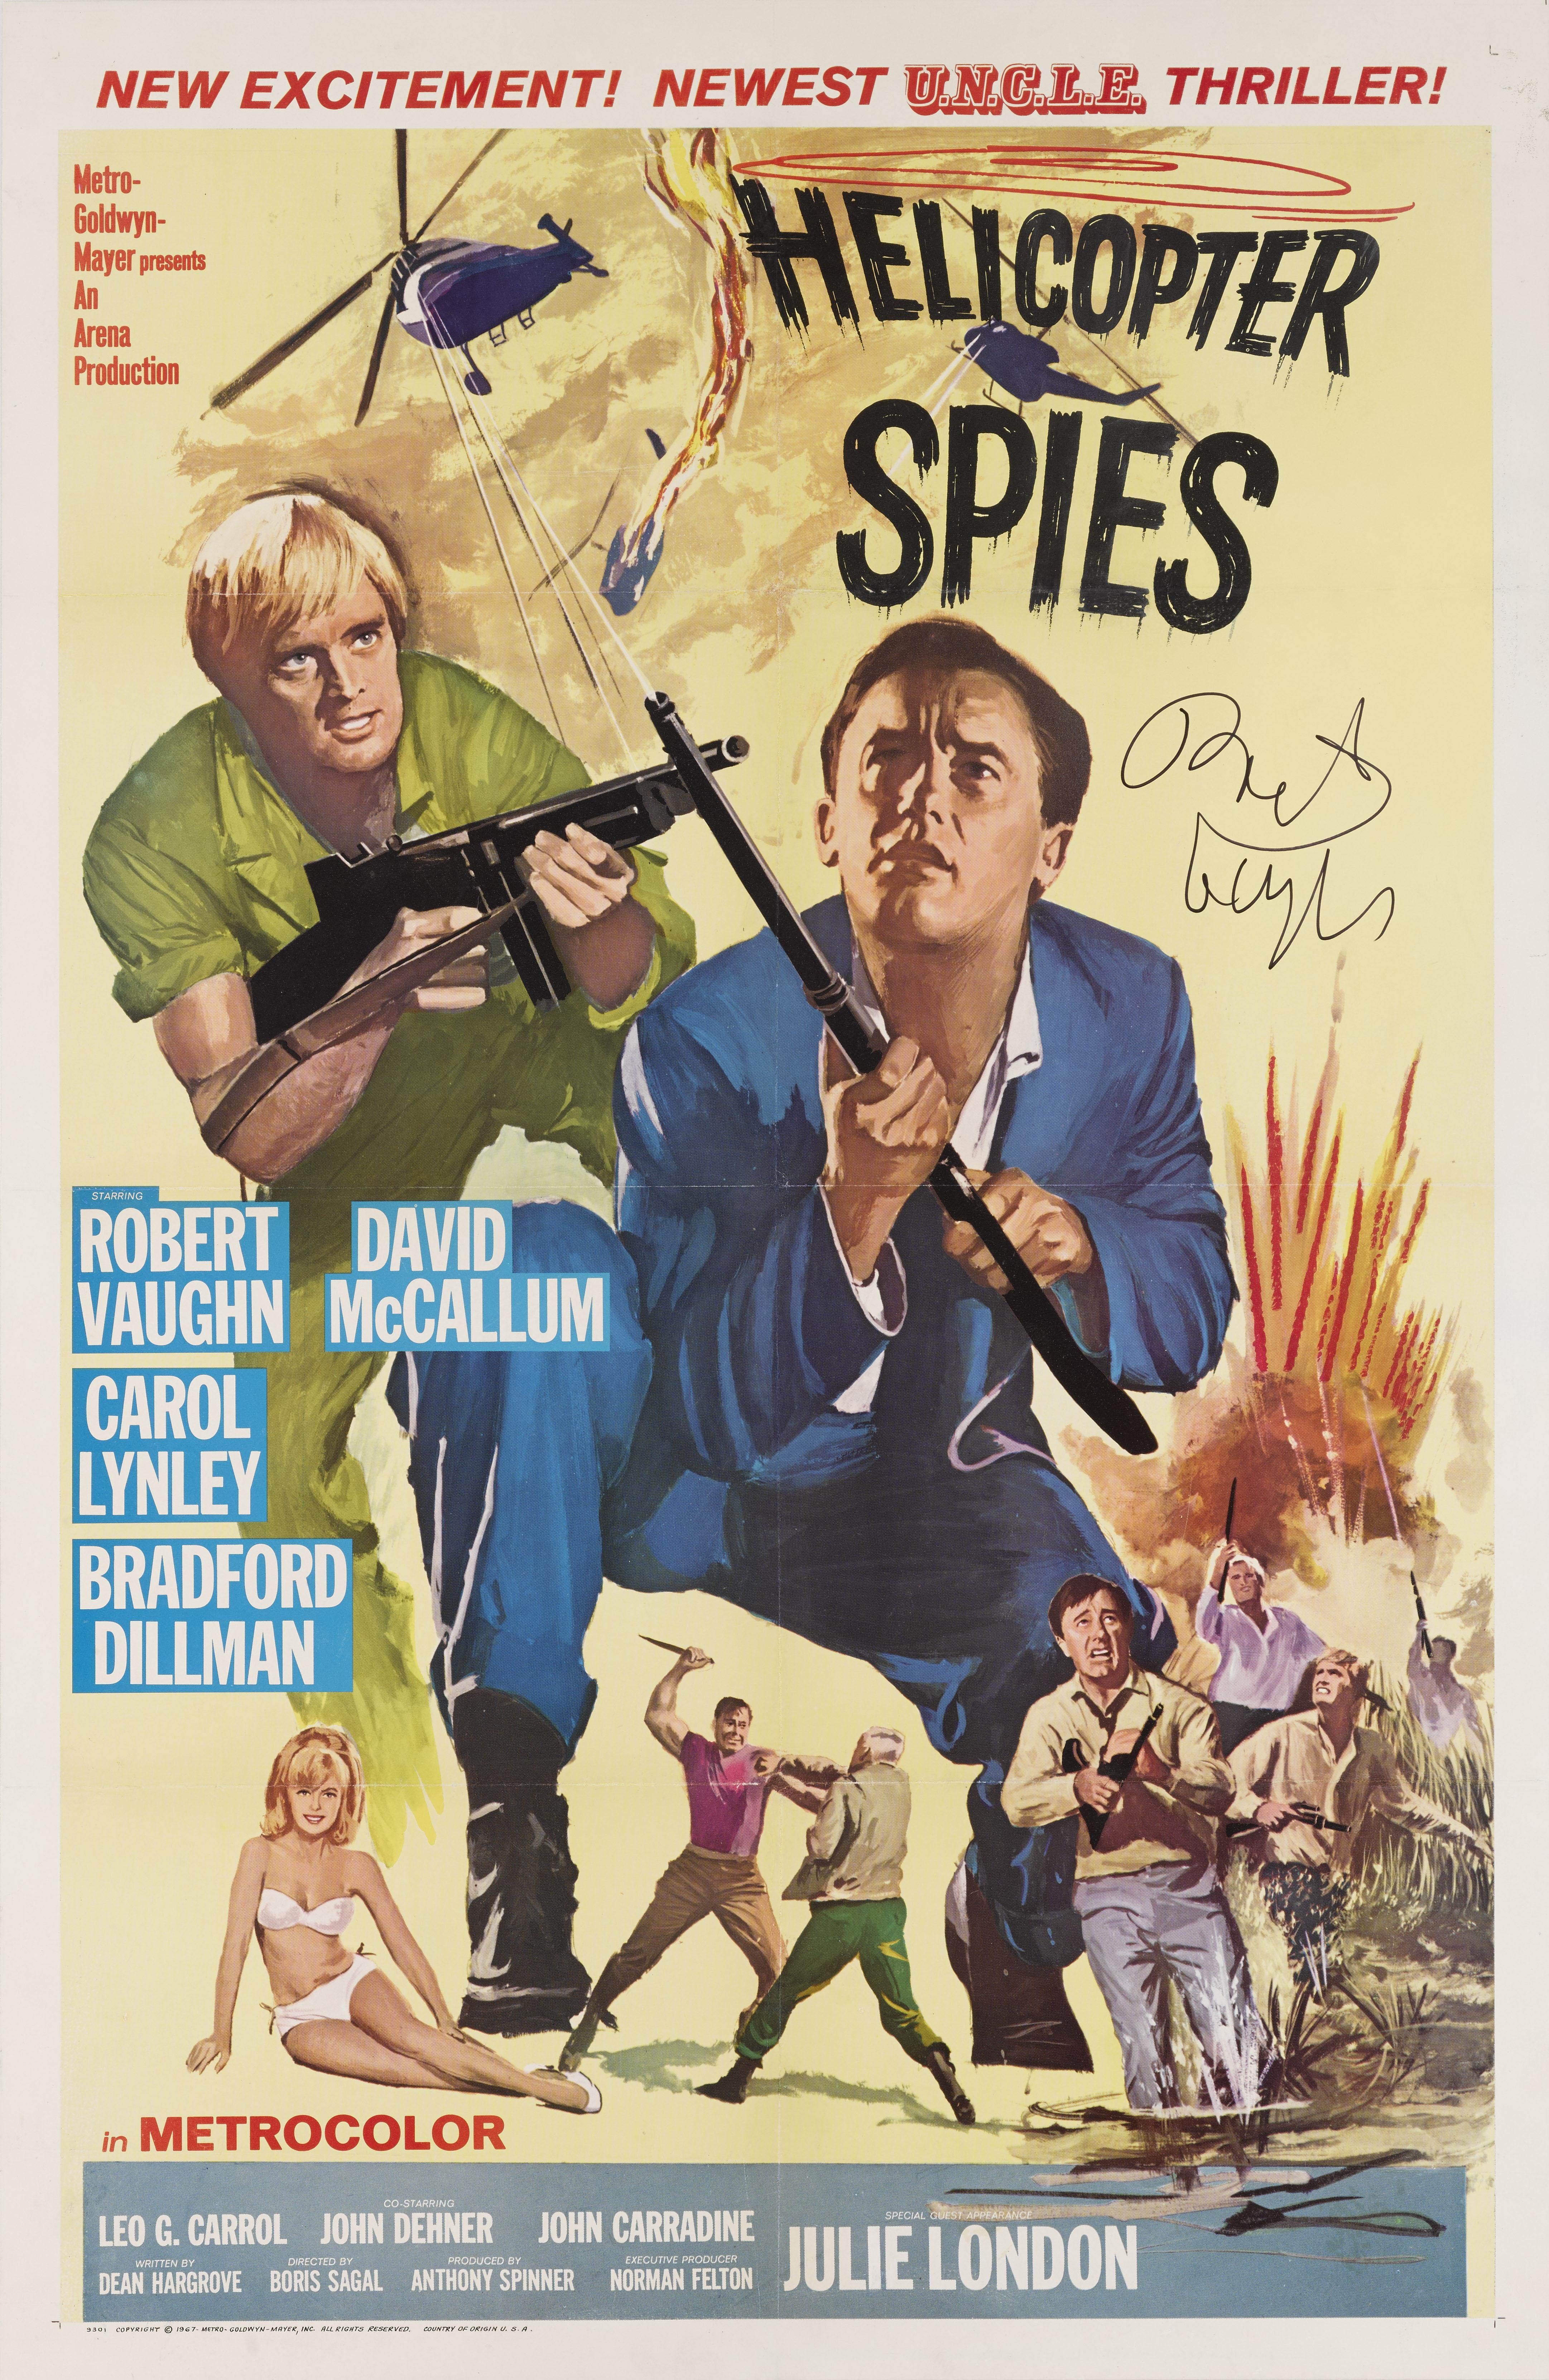 Original US film poster for the 1968 film directed by Boris Sagal, this film was a version of a number of television episodes of The Man from U.N.C.L.E. This film also stars Robert Vaughn (Napoleon Solo) and David McCallum (Illya Kuryakin). The lead